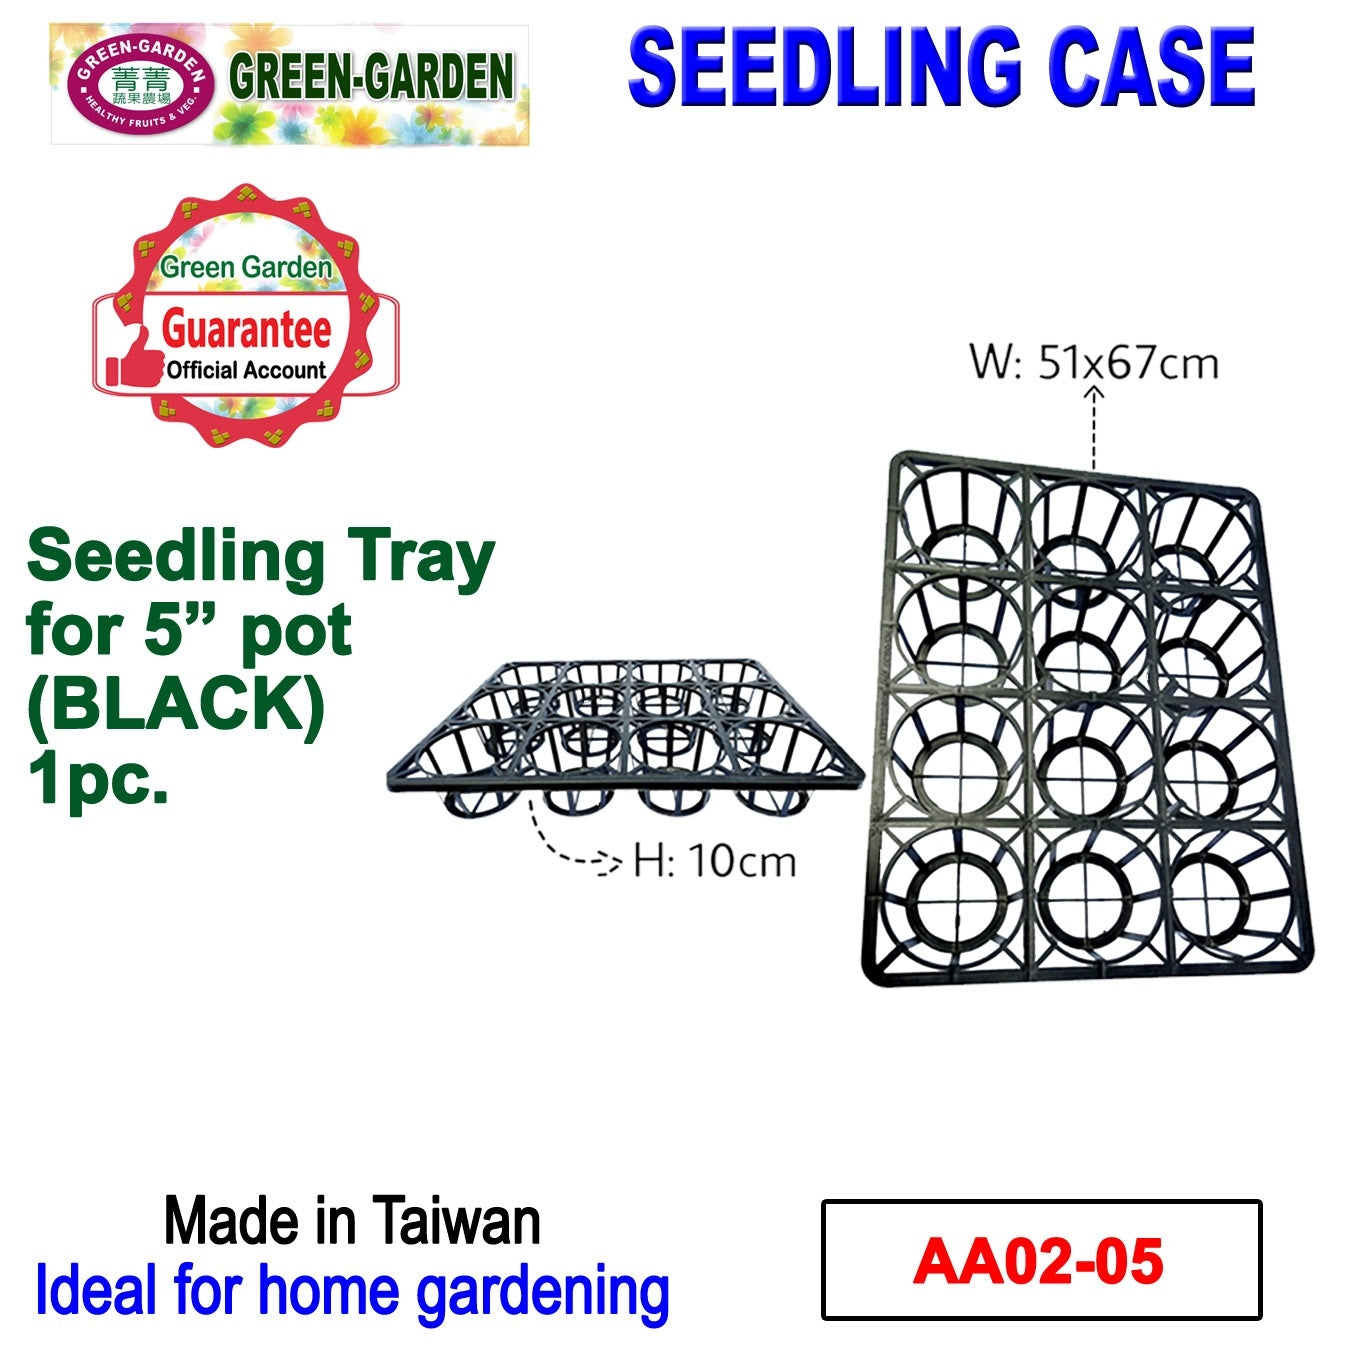 UV TREATED Seedling Carry Tray for 5" Pot